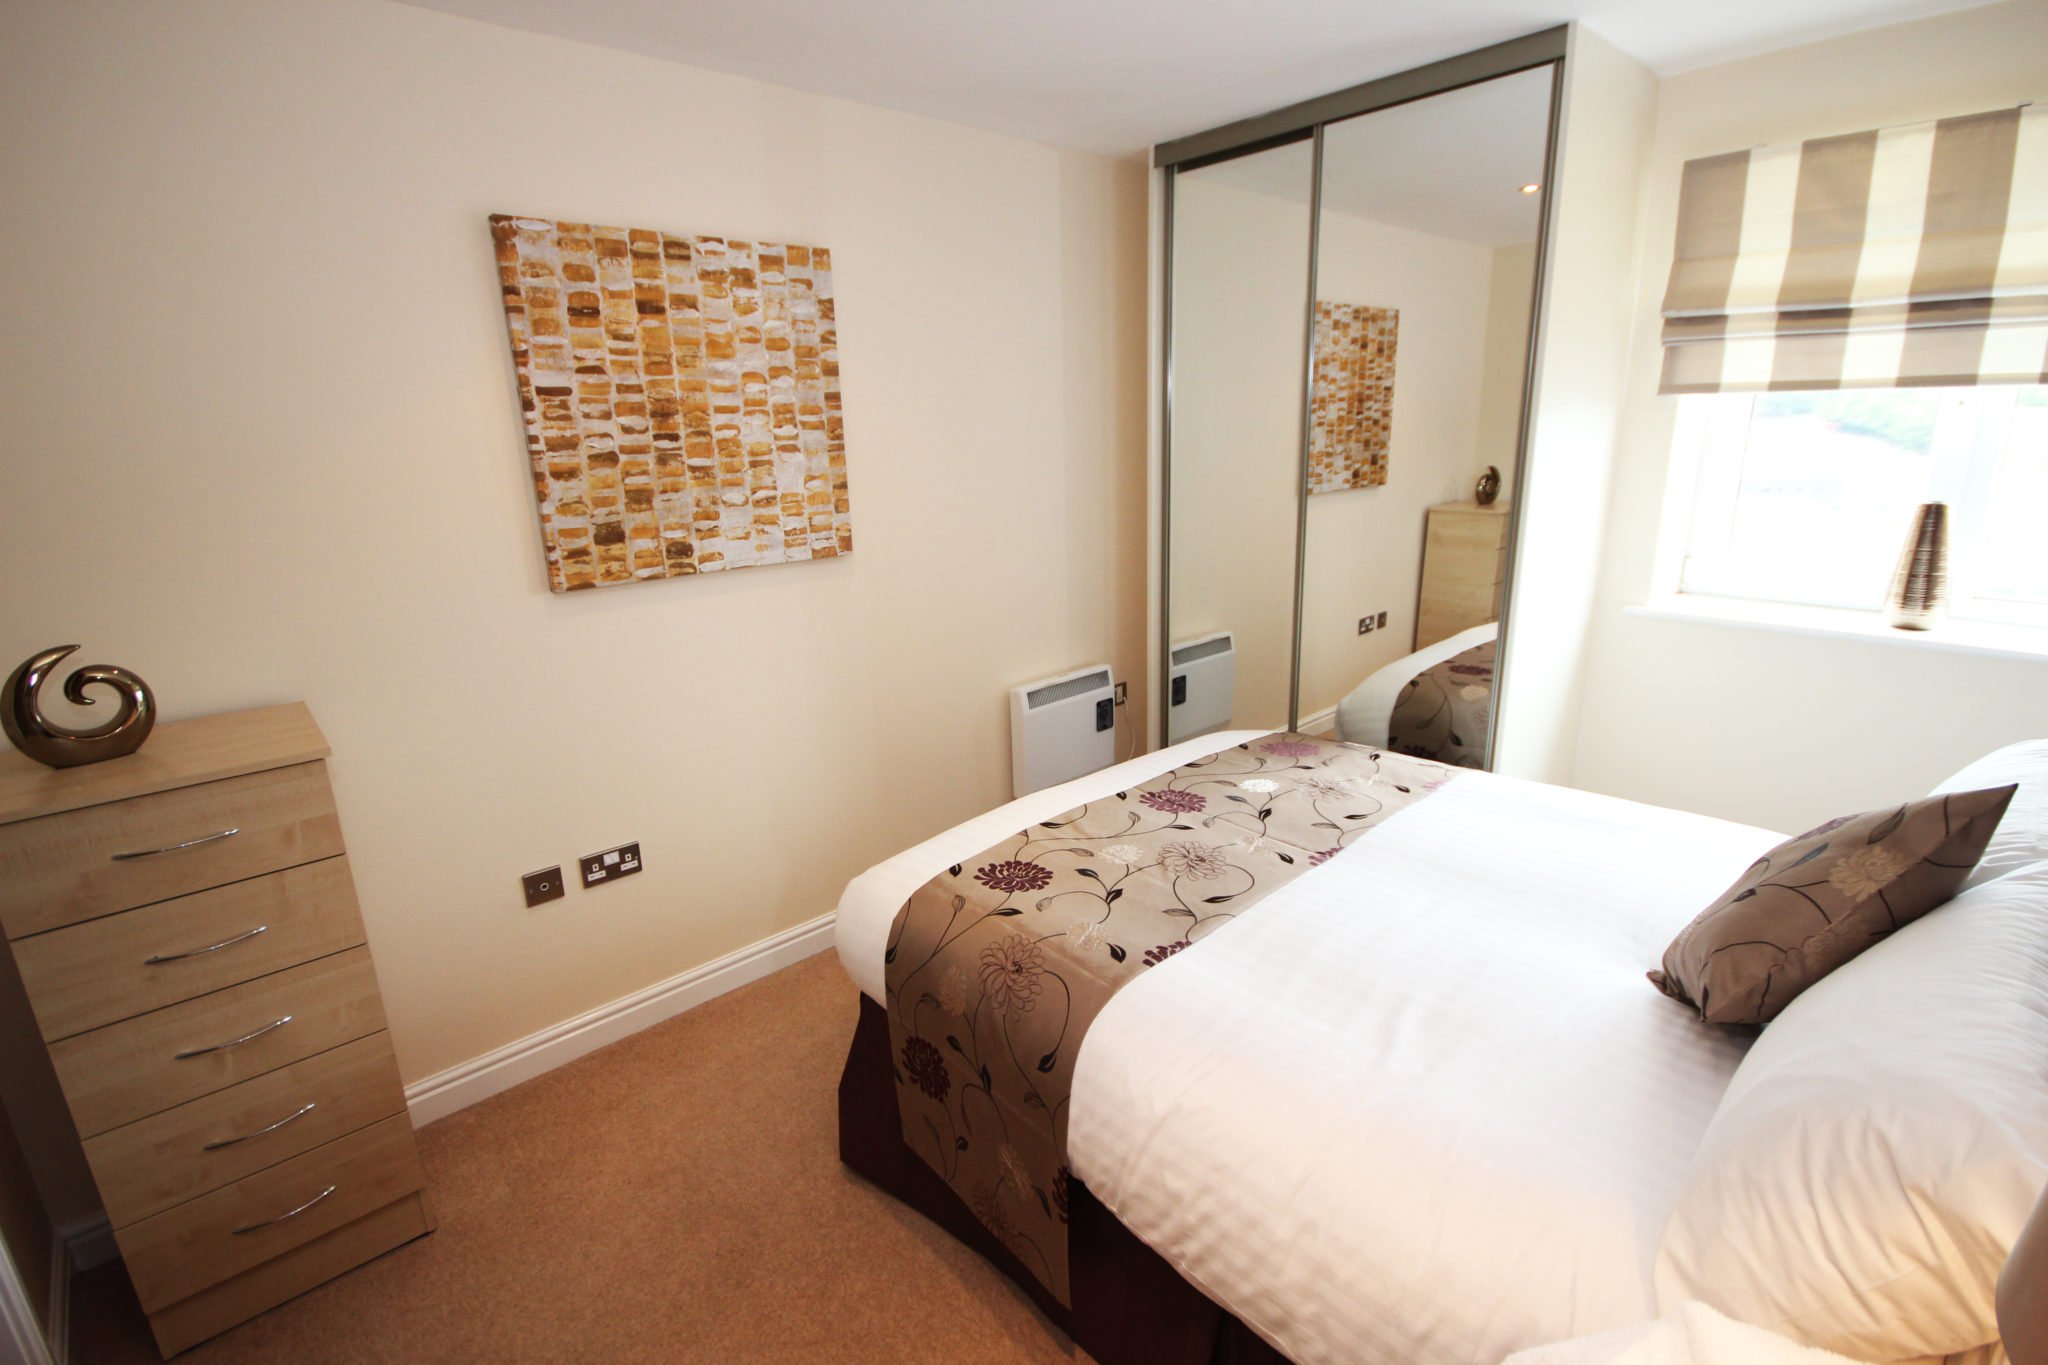 Short-Lets-Newcastle-UK-available-Now!-Book-Serviced-Apartments-in-Central-Newcastle-with-free-Wifi,-Cleaning,-Lift,-24h-Reception-&-All-Bills-Incl!-30%-Off-|-Urban-Stay